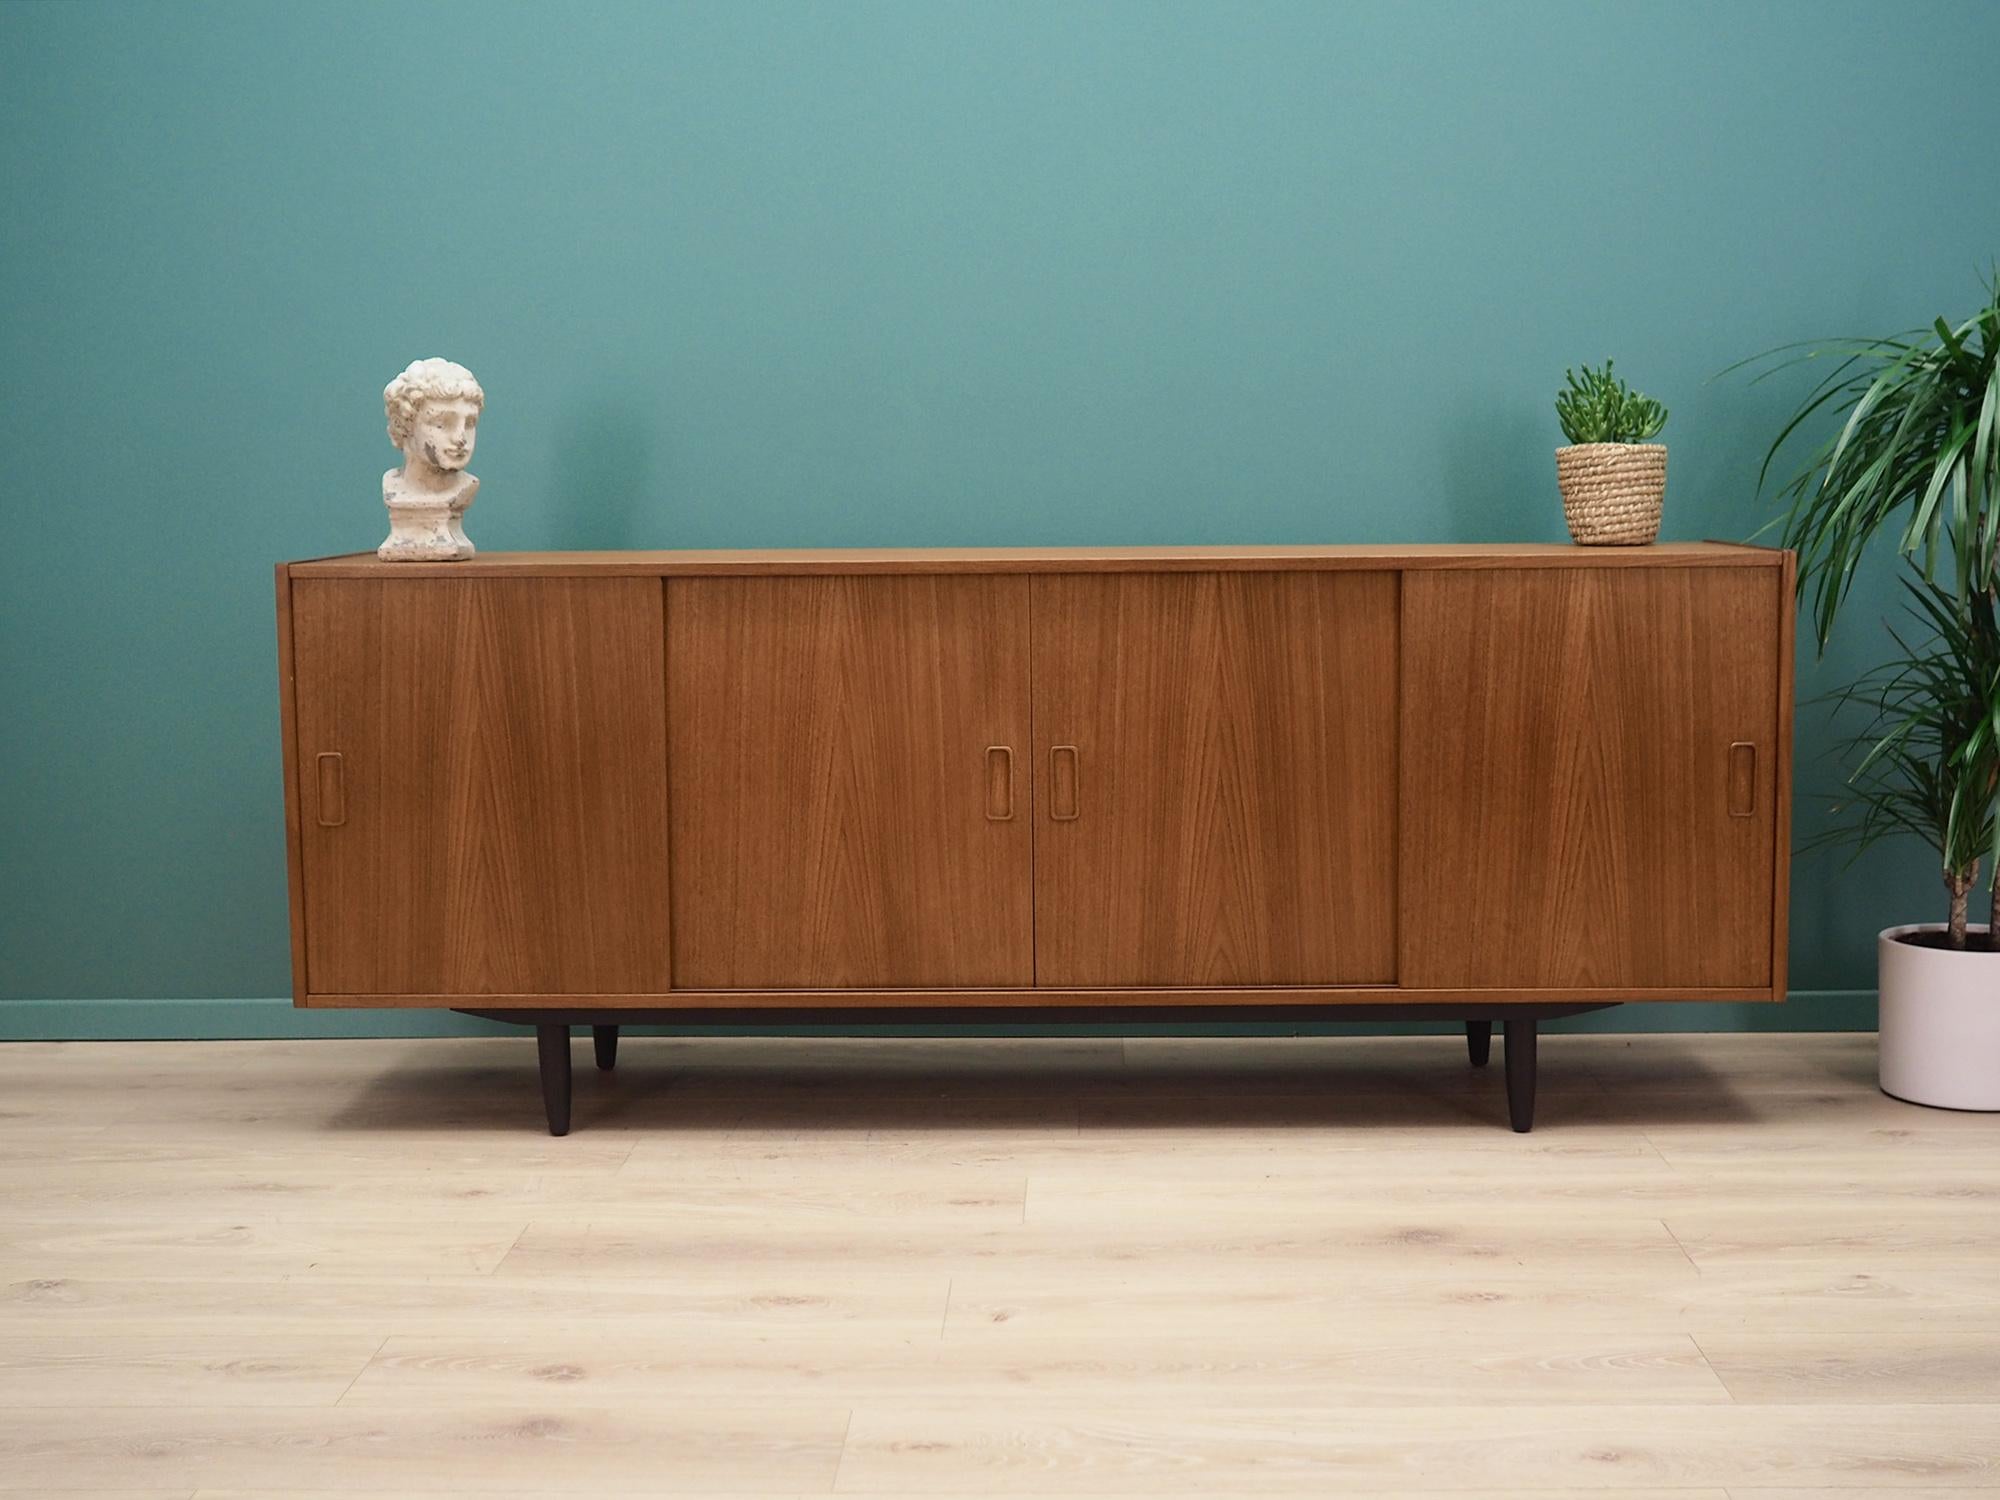 Sideboard was made in the 1960s and was produced by the famous Danish manufacturer Westergard. It was designed by the leading Danish design icon Erik Jensen.

The structure is covered with teak veneer. The legs are made of solid wood and